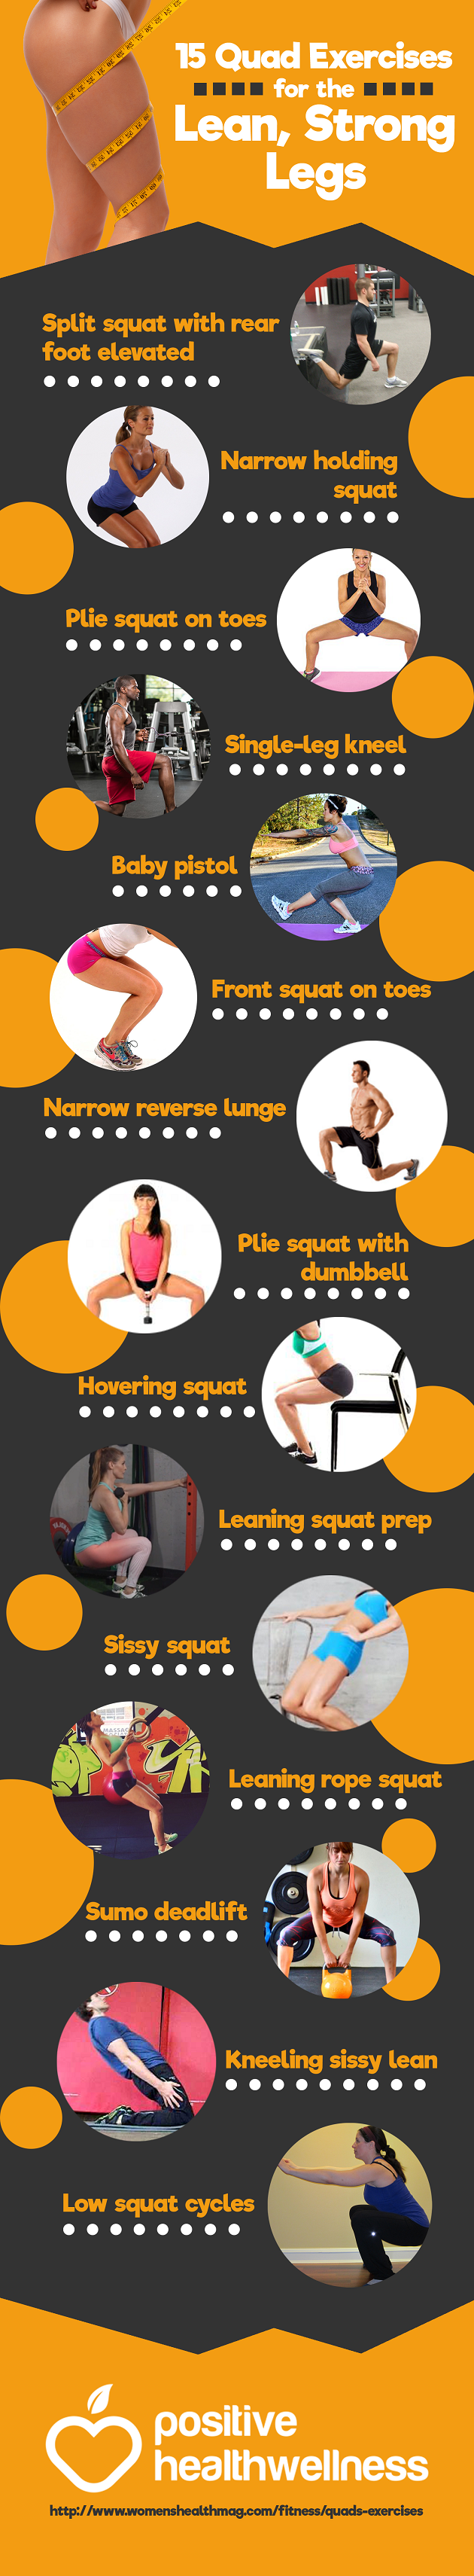 15 Quad Exercises for the Lean, Strong Legs – Infographic